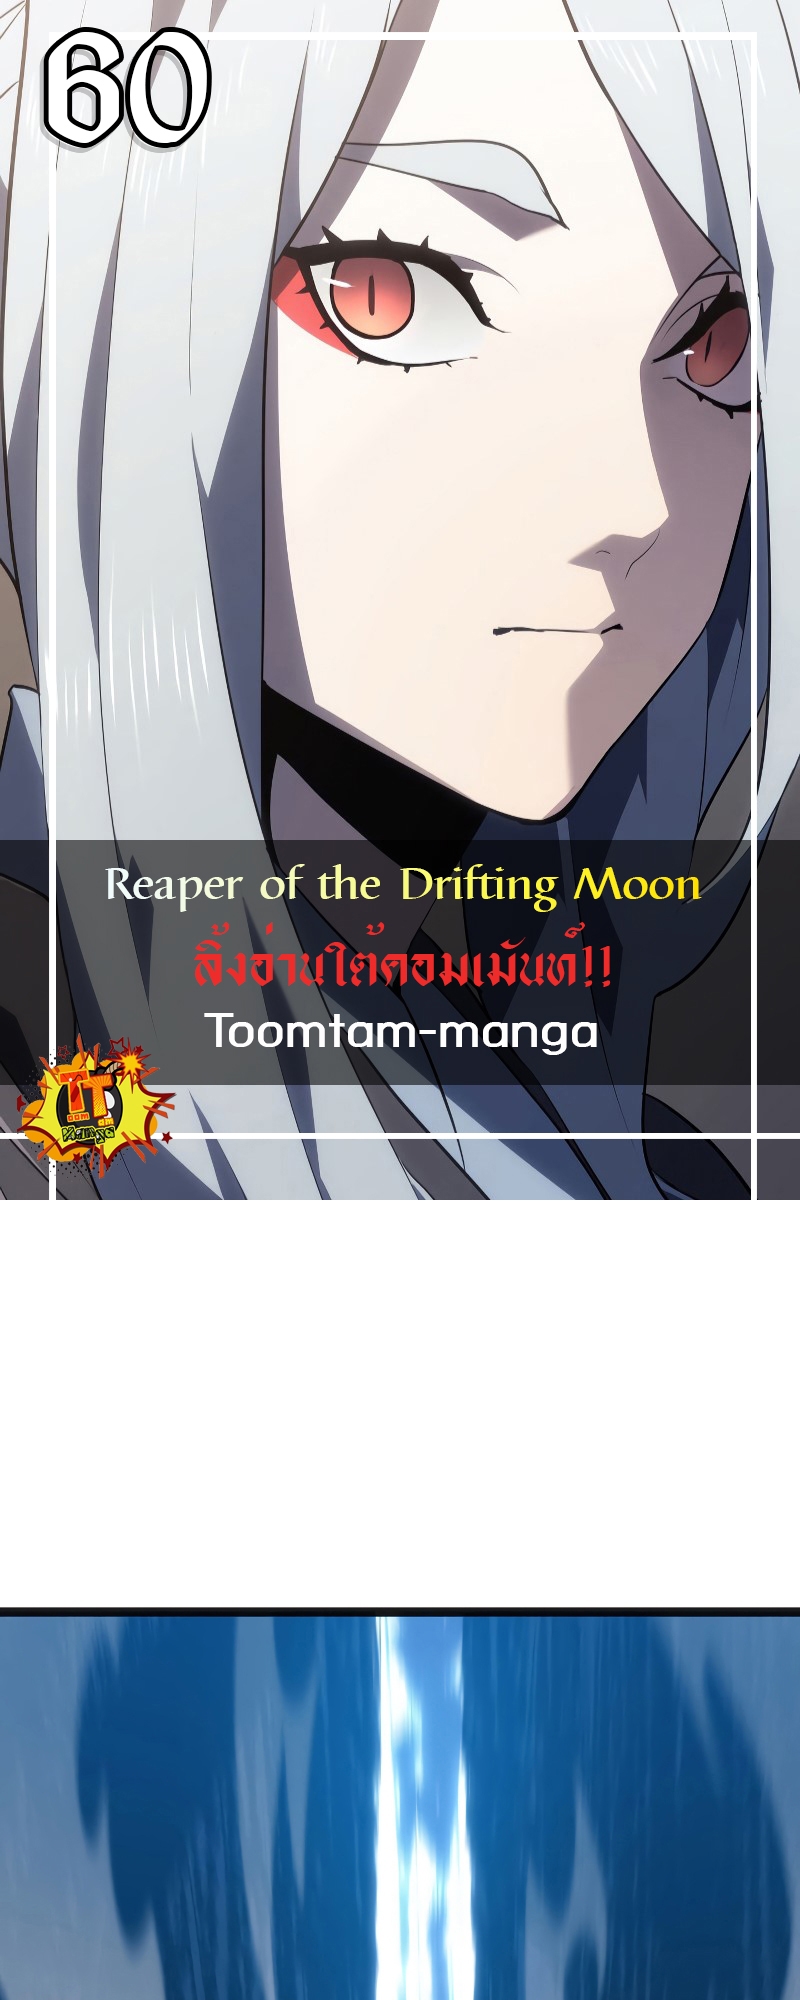 Reaper of the Drifting Moon 60 1 11 660001